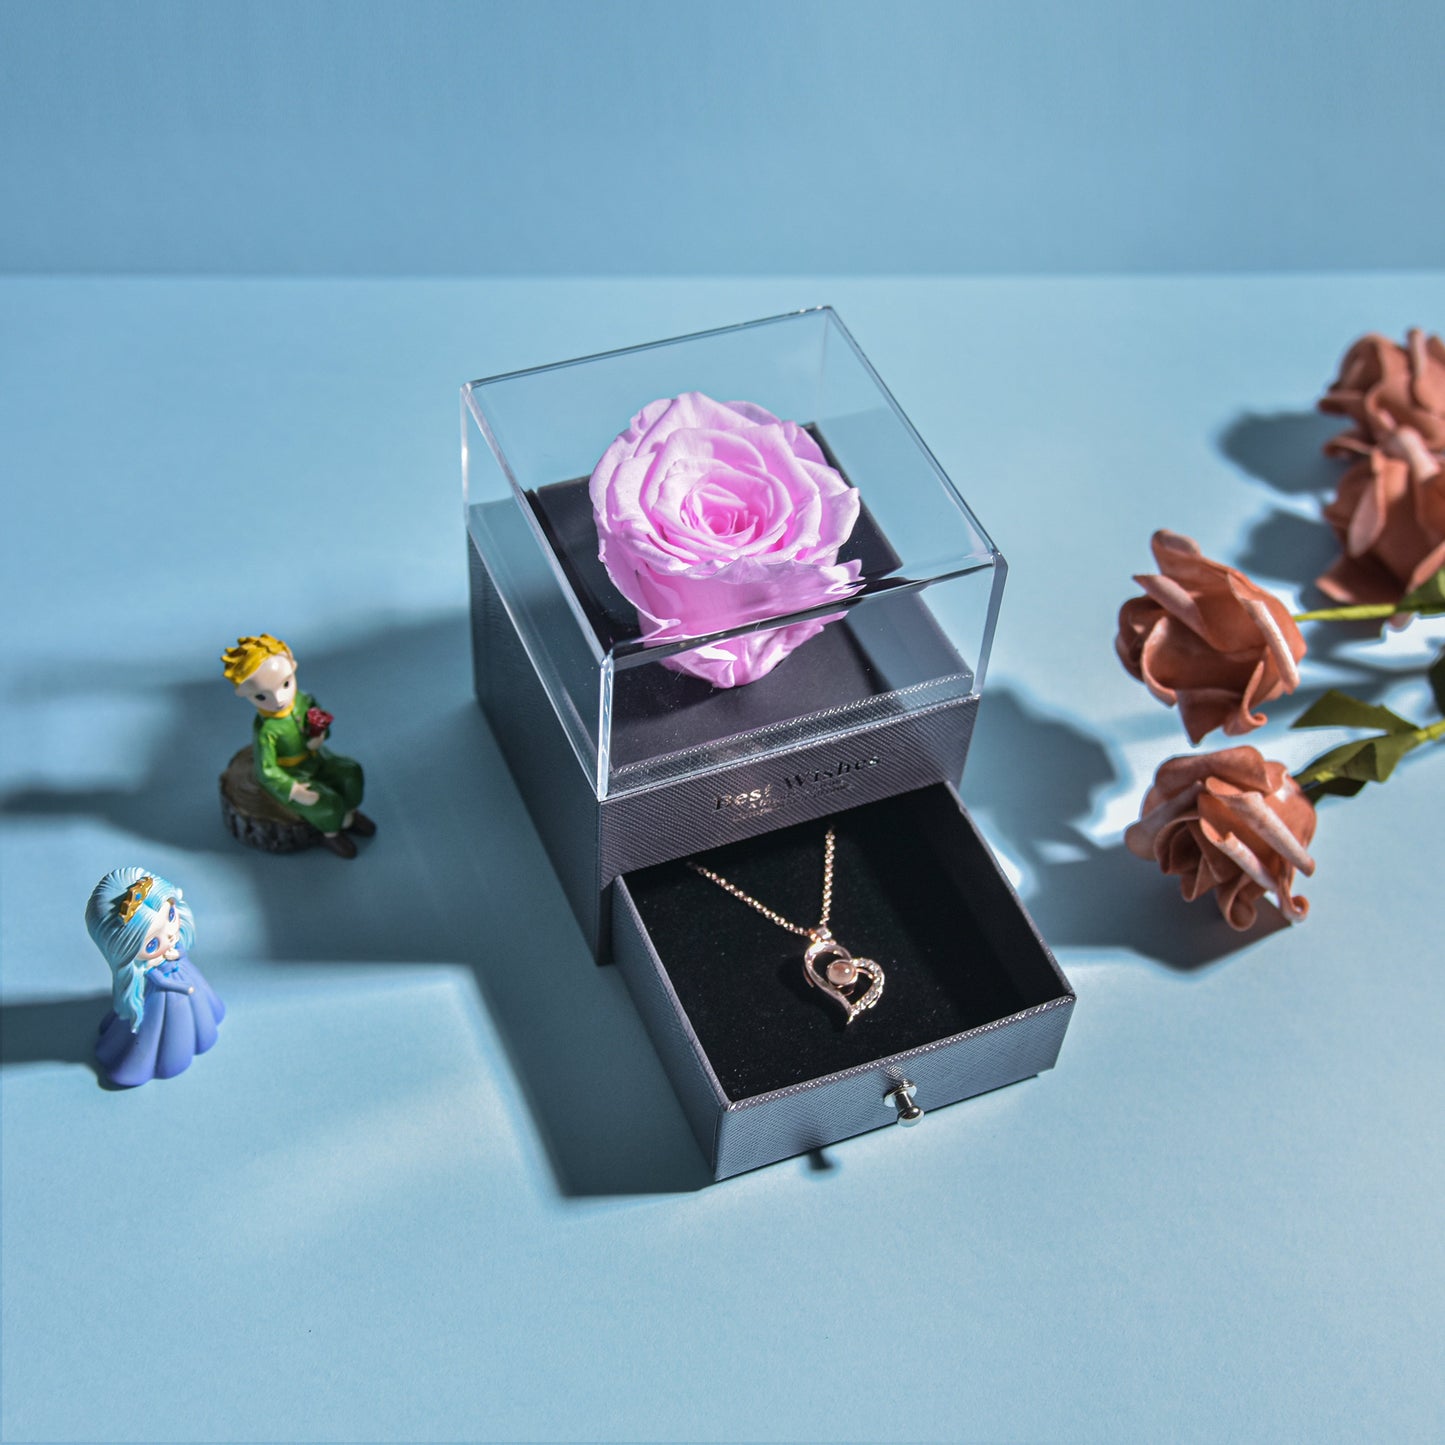 Ainyrose Jewelry Box Forever Rose-6 Colors